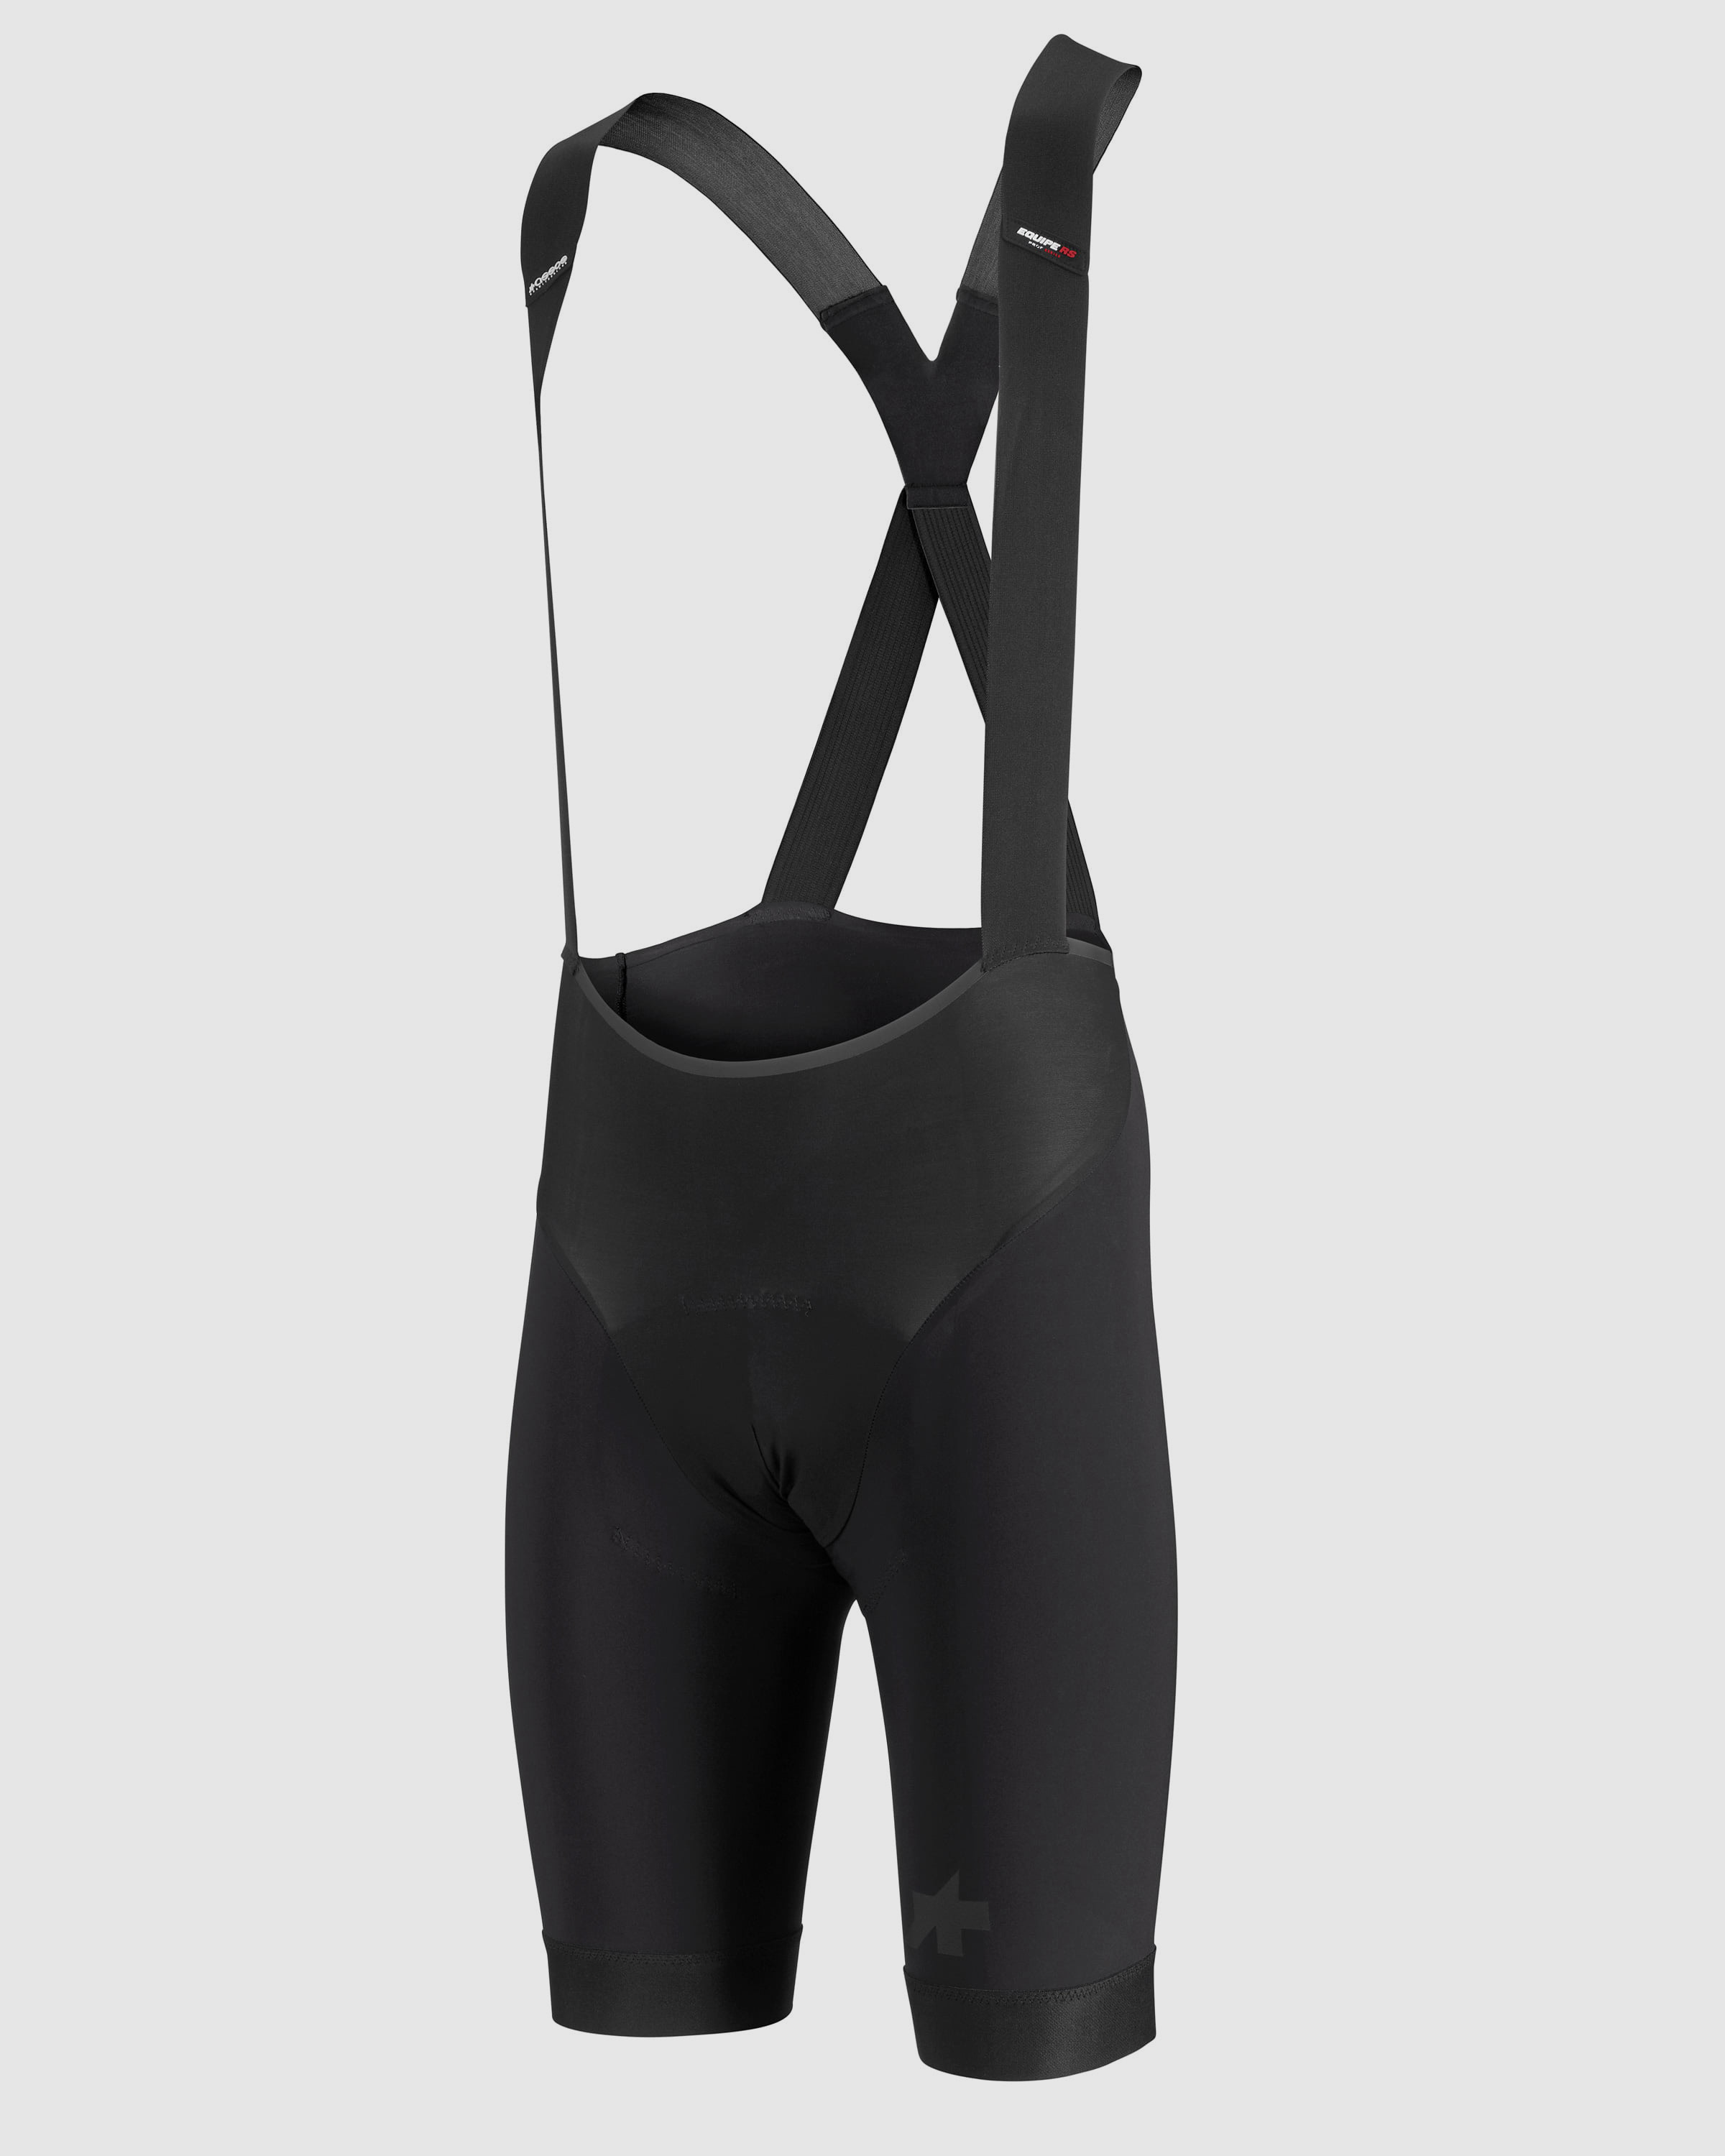 EQUIPE RSR Bib Shorts S9 - ASSOS Of Switzerland - Official Outlet